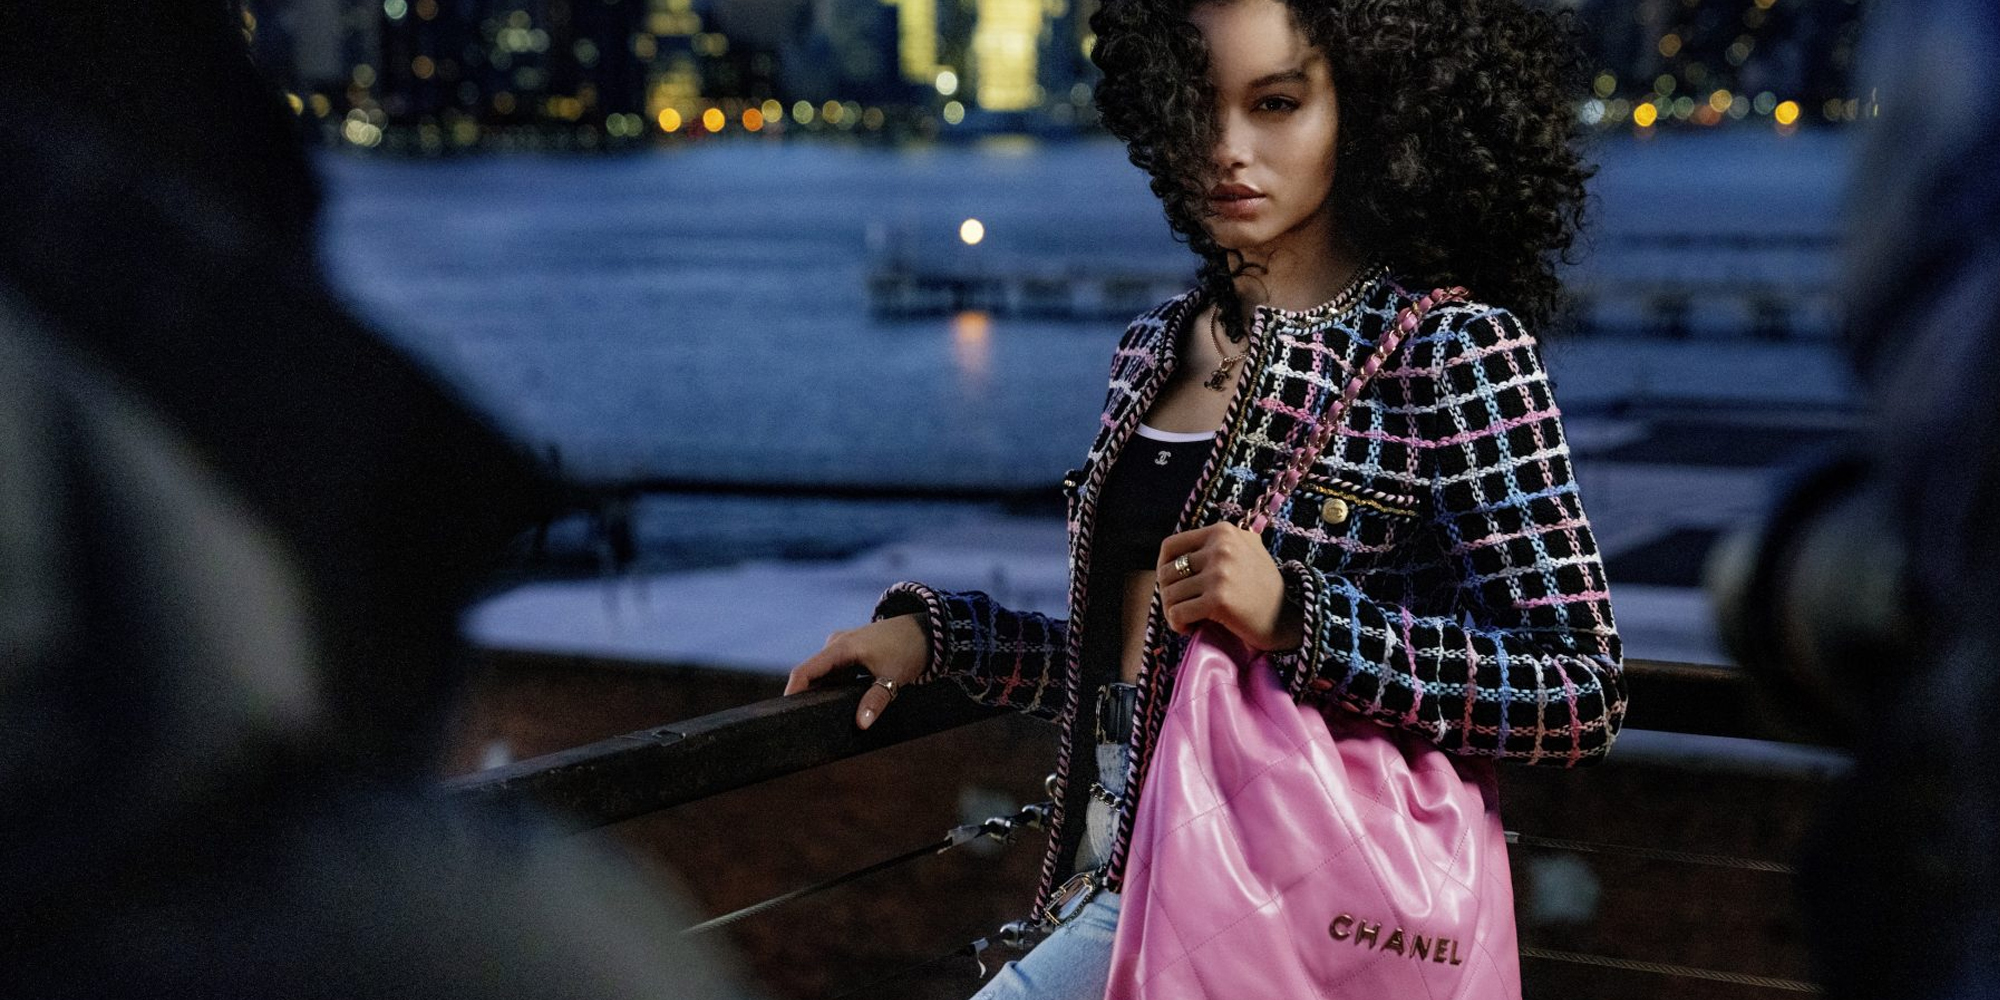 Chanel 22 Handbag Ad Campaign Featuring an All-Star Cast